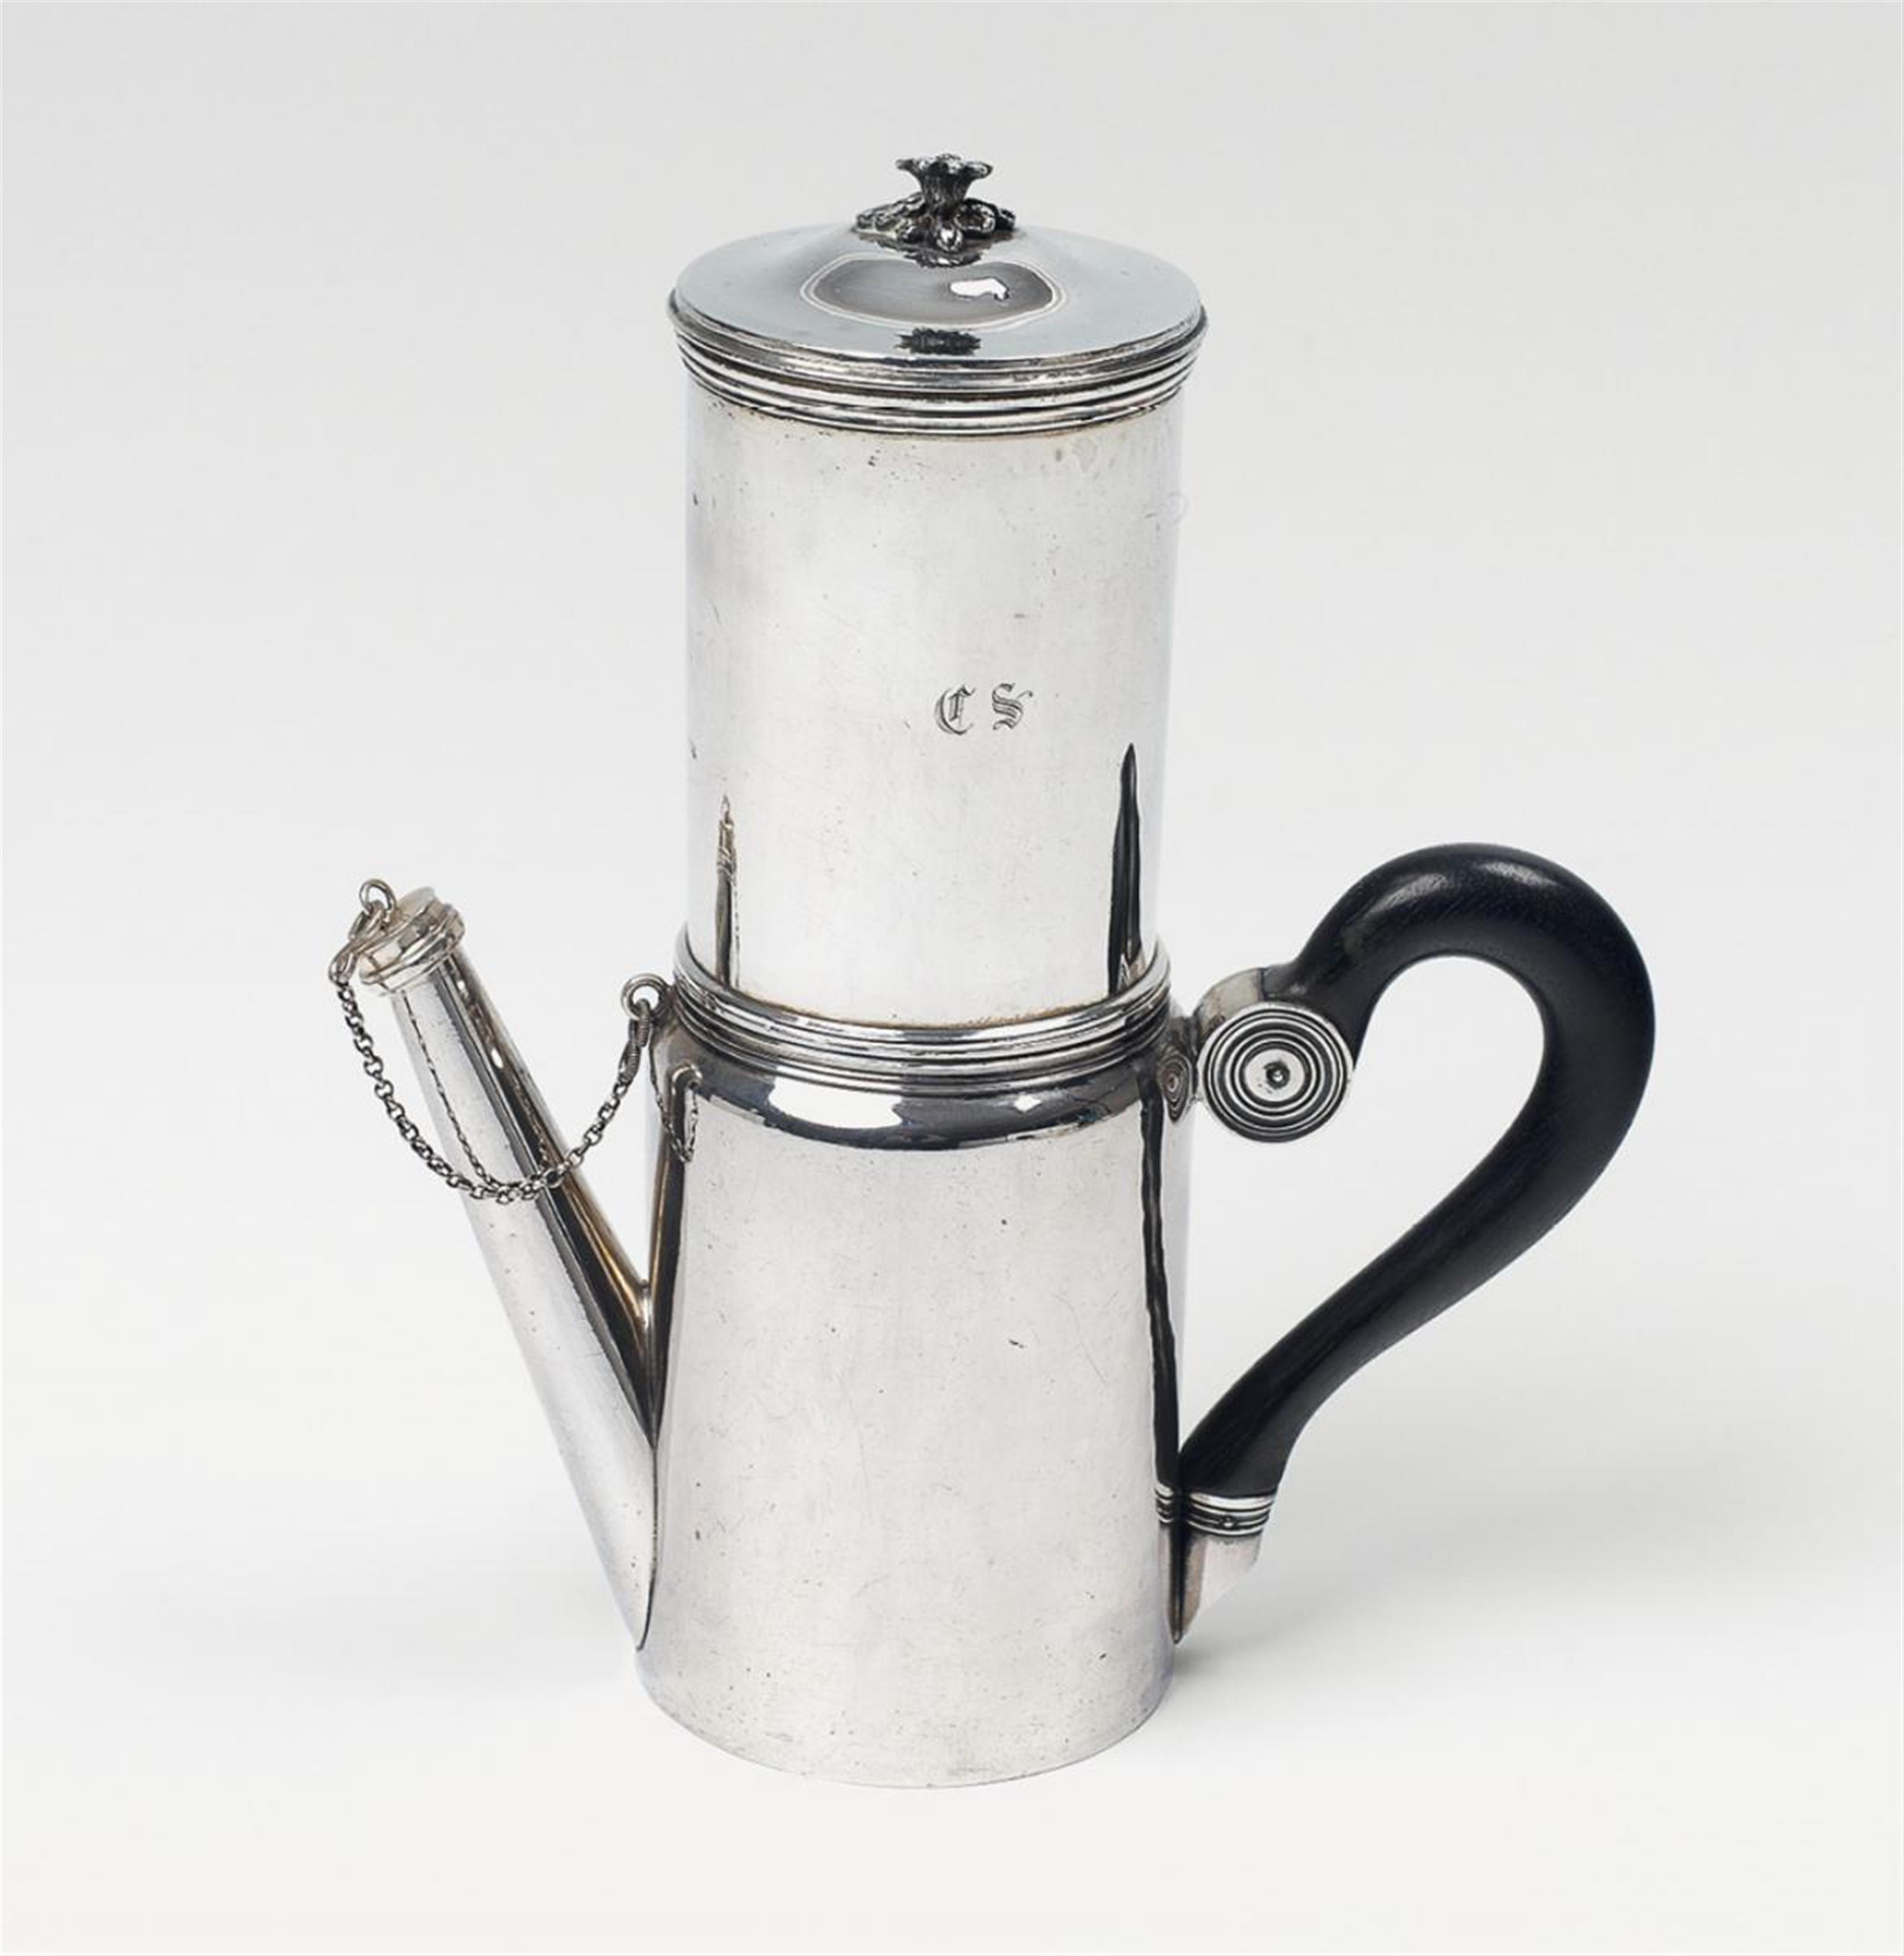 A small French silver pitcher with filter, monogrammed "CS". Mid 19th C. - image-1